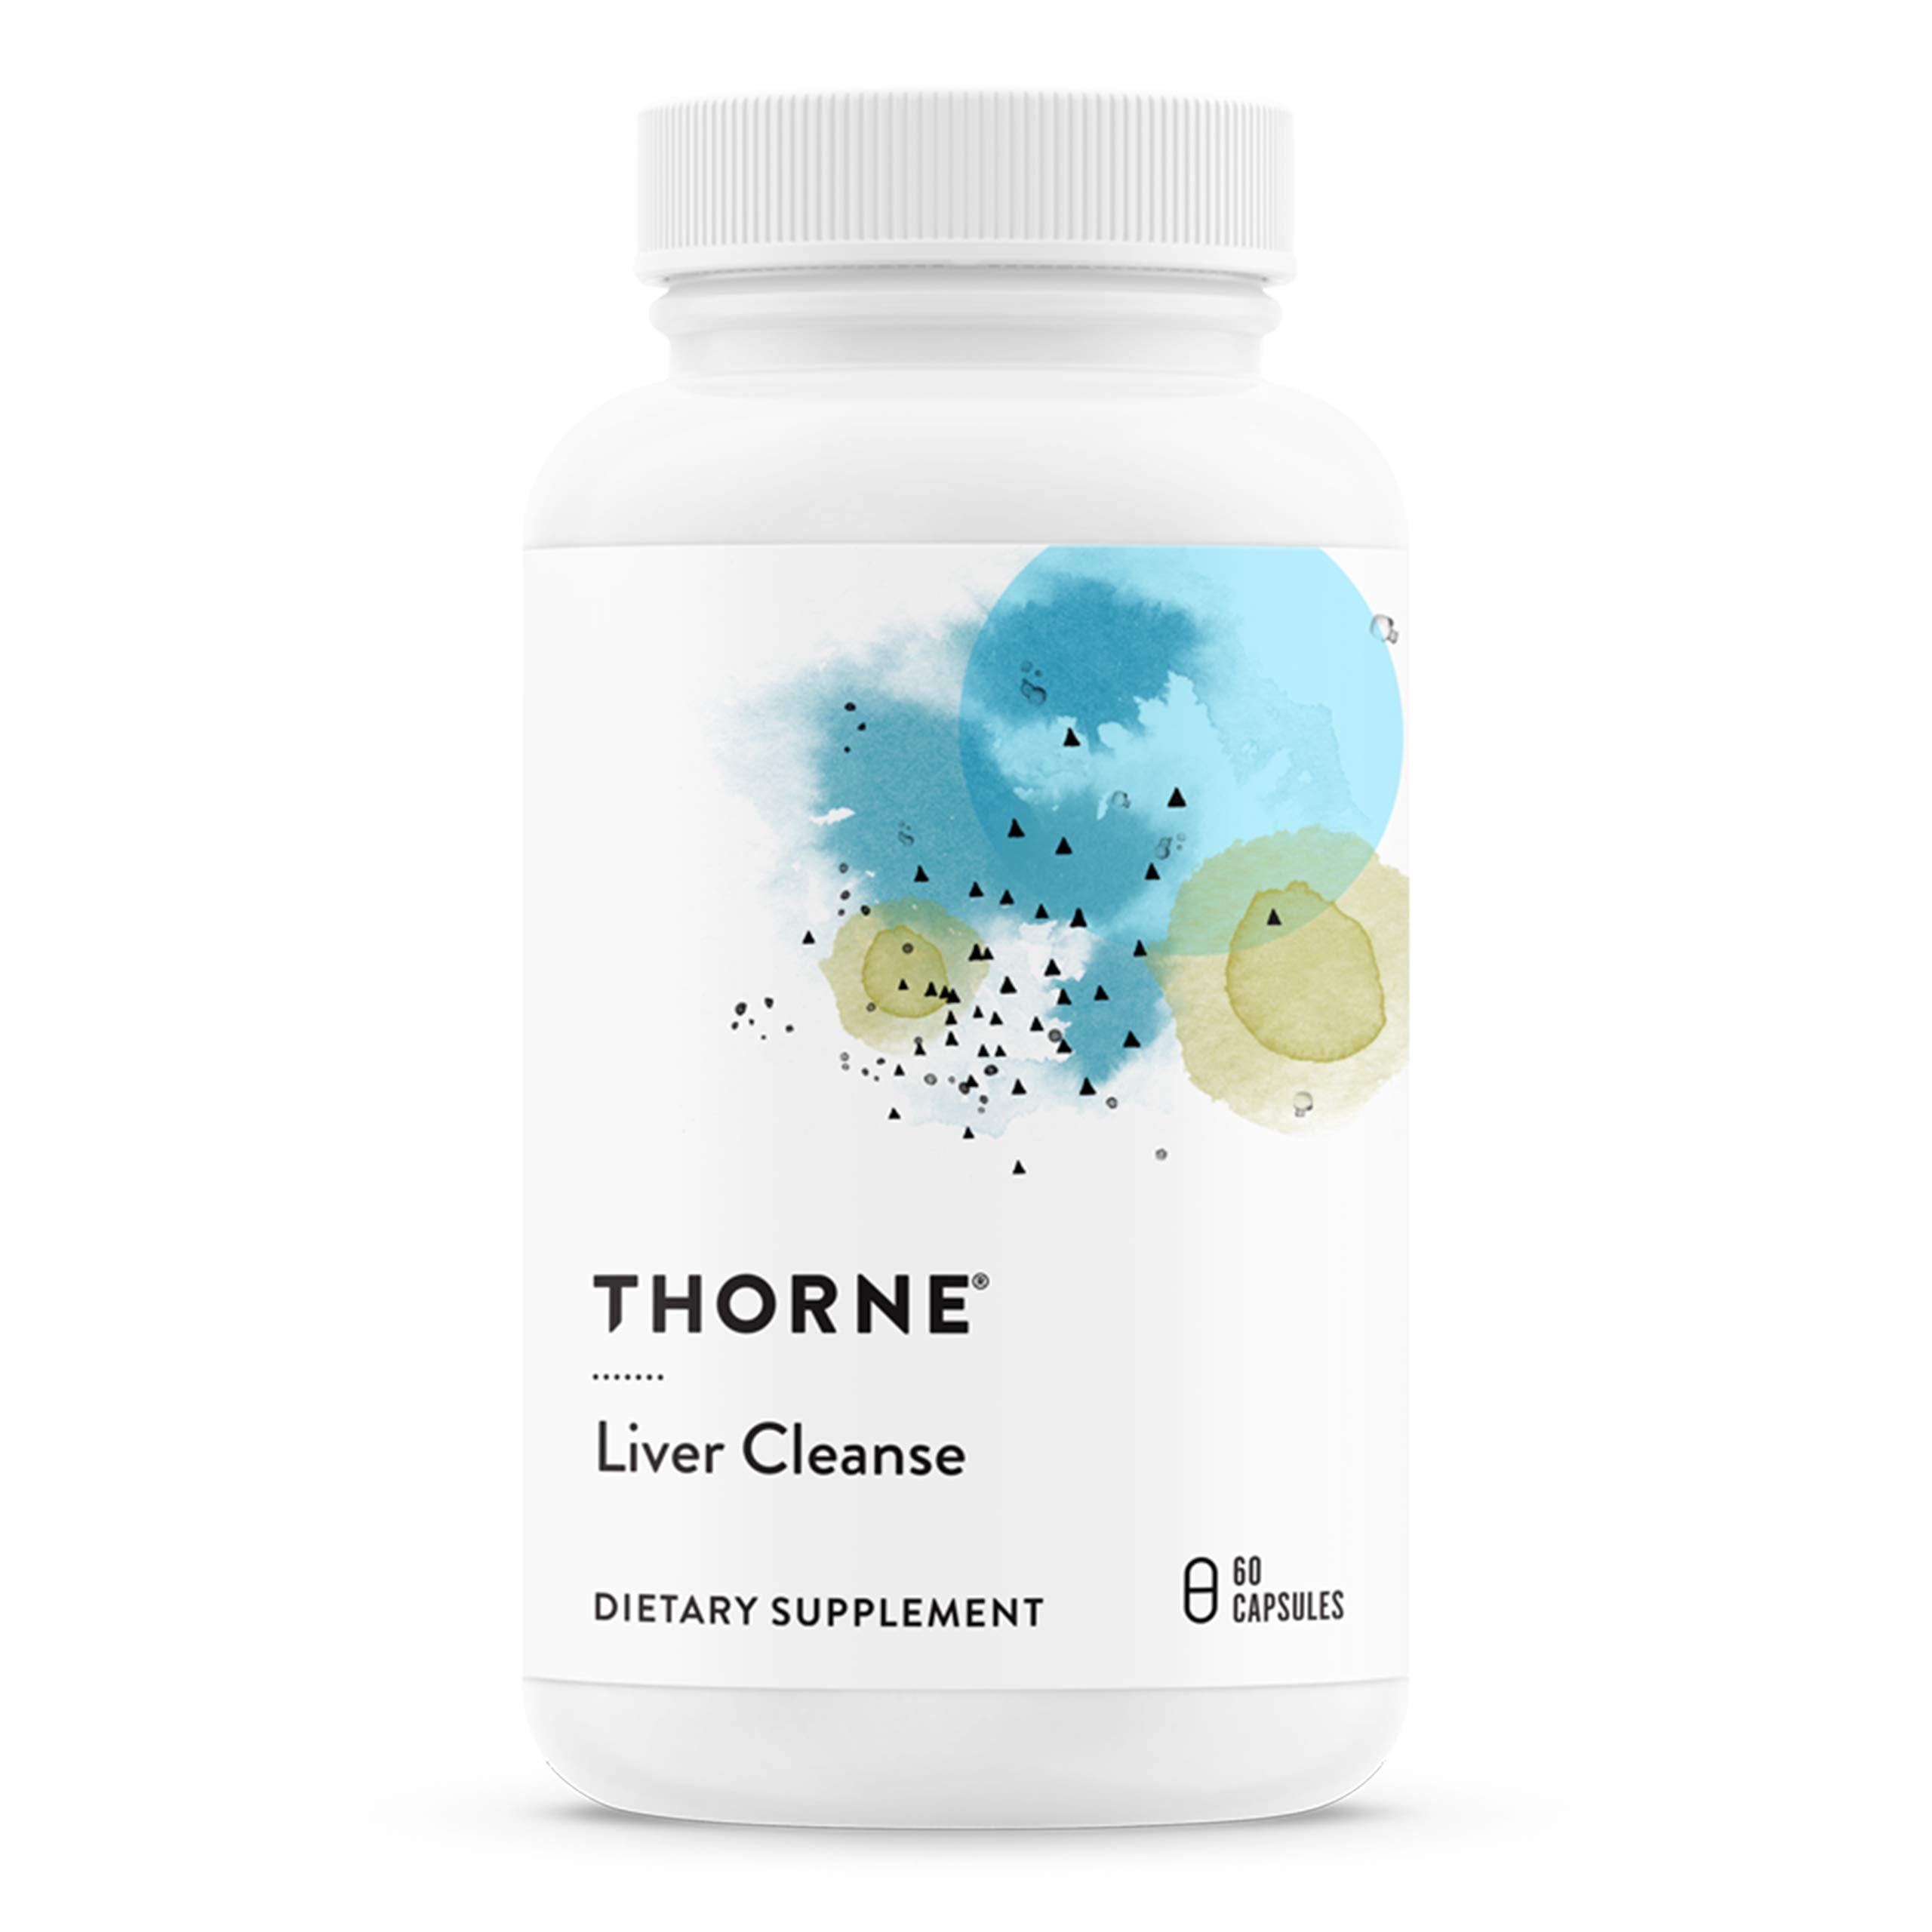 Thorne Liver Cleanse Detoxification and Liver Support - 60 Capsules